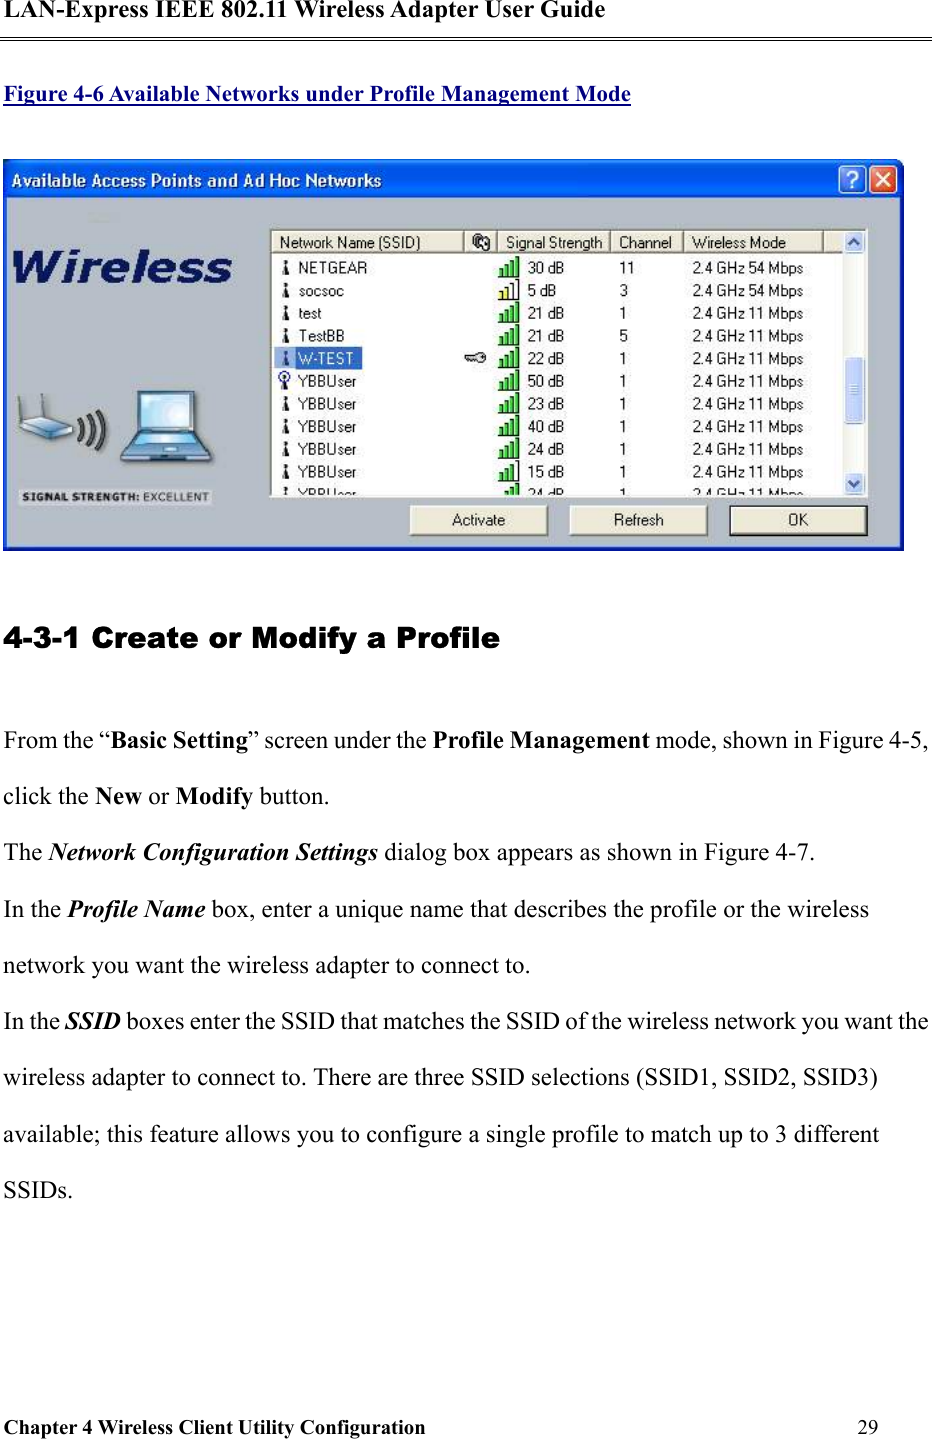 LAN-Express IEEE 802.11 Wireless Adapter User Guide Chapter 4 Wireless Client Utility Configuration   29  Figure 4-6 Available Networks under Profile Management Mode  4-3-1 Create or Modify a Profile From the “Basic Setting” screen under the Profile Management mode, shown in Figure 4-5, click the New or Modify button.  The Network Configuration Settings dialog box appears as shown in Figure 4-7. In the Profile Name box, enter a unique name that describes the profile or the wireless network you want the wireless adapter to connect to. In the SSID boxes enter the SSID that matches the SSID of the wireless network you want the wireless adapter to connect to. There are three SSID selections (SSID1, SSID2, SSID3) available; this feature allows you to configure a single profile to match up to 3 different SSIDs.  